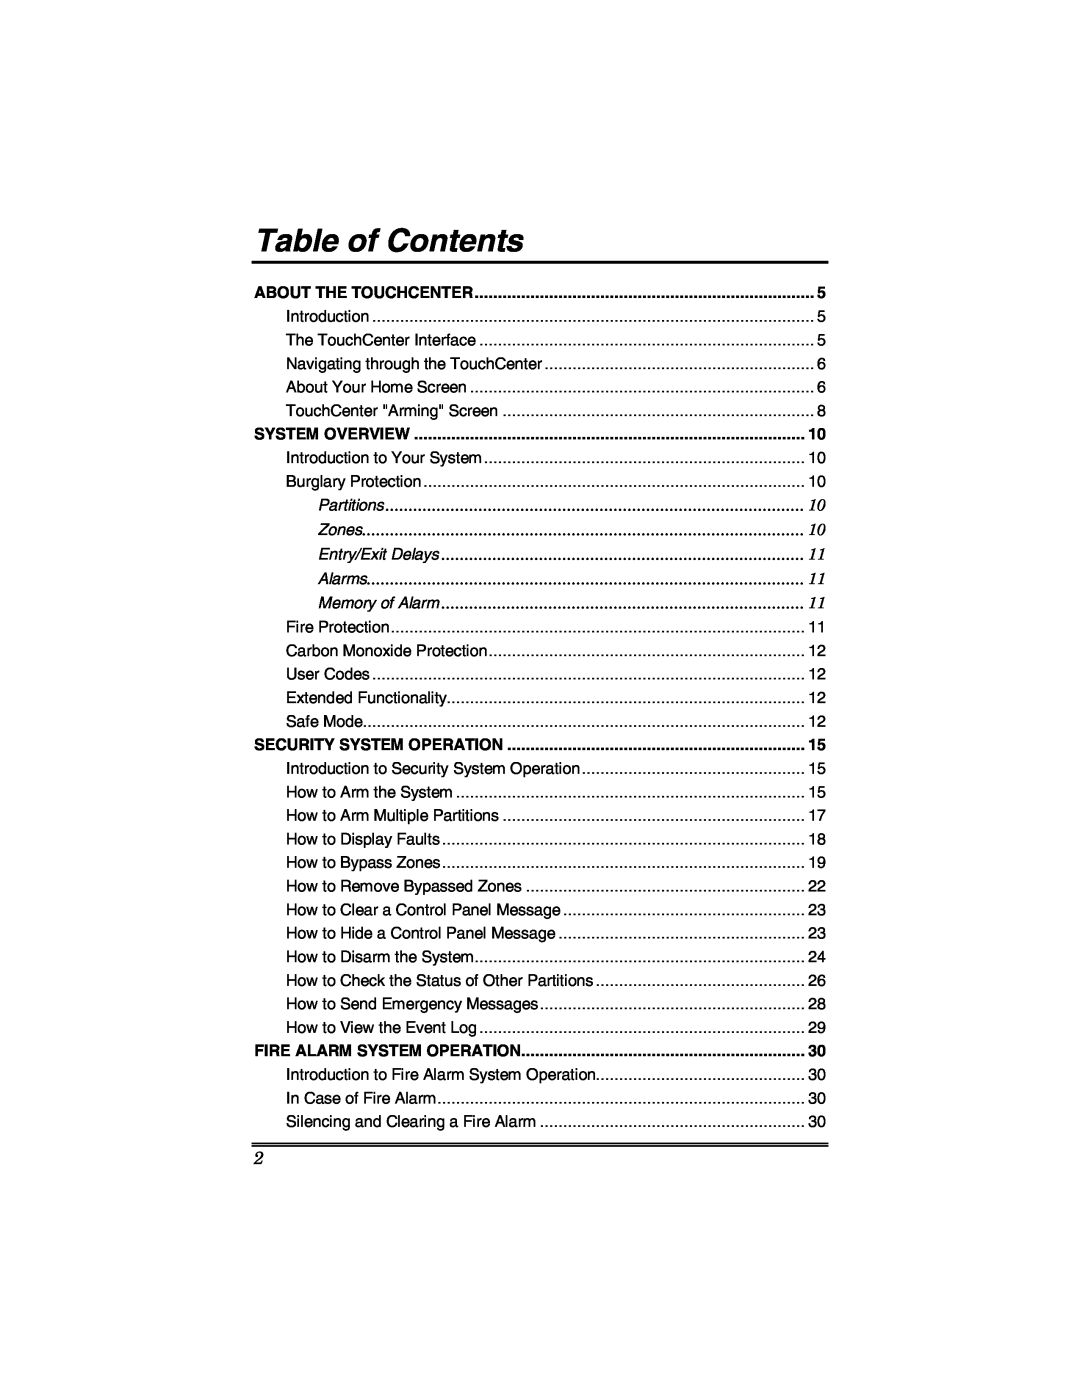 Honeywell 6271 Table of Contents, About The Touchcenter, System Overview, Partitions, Zones, Entry/Exit Delays, Alarms 